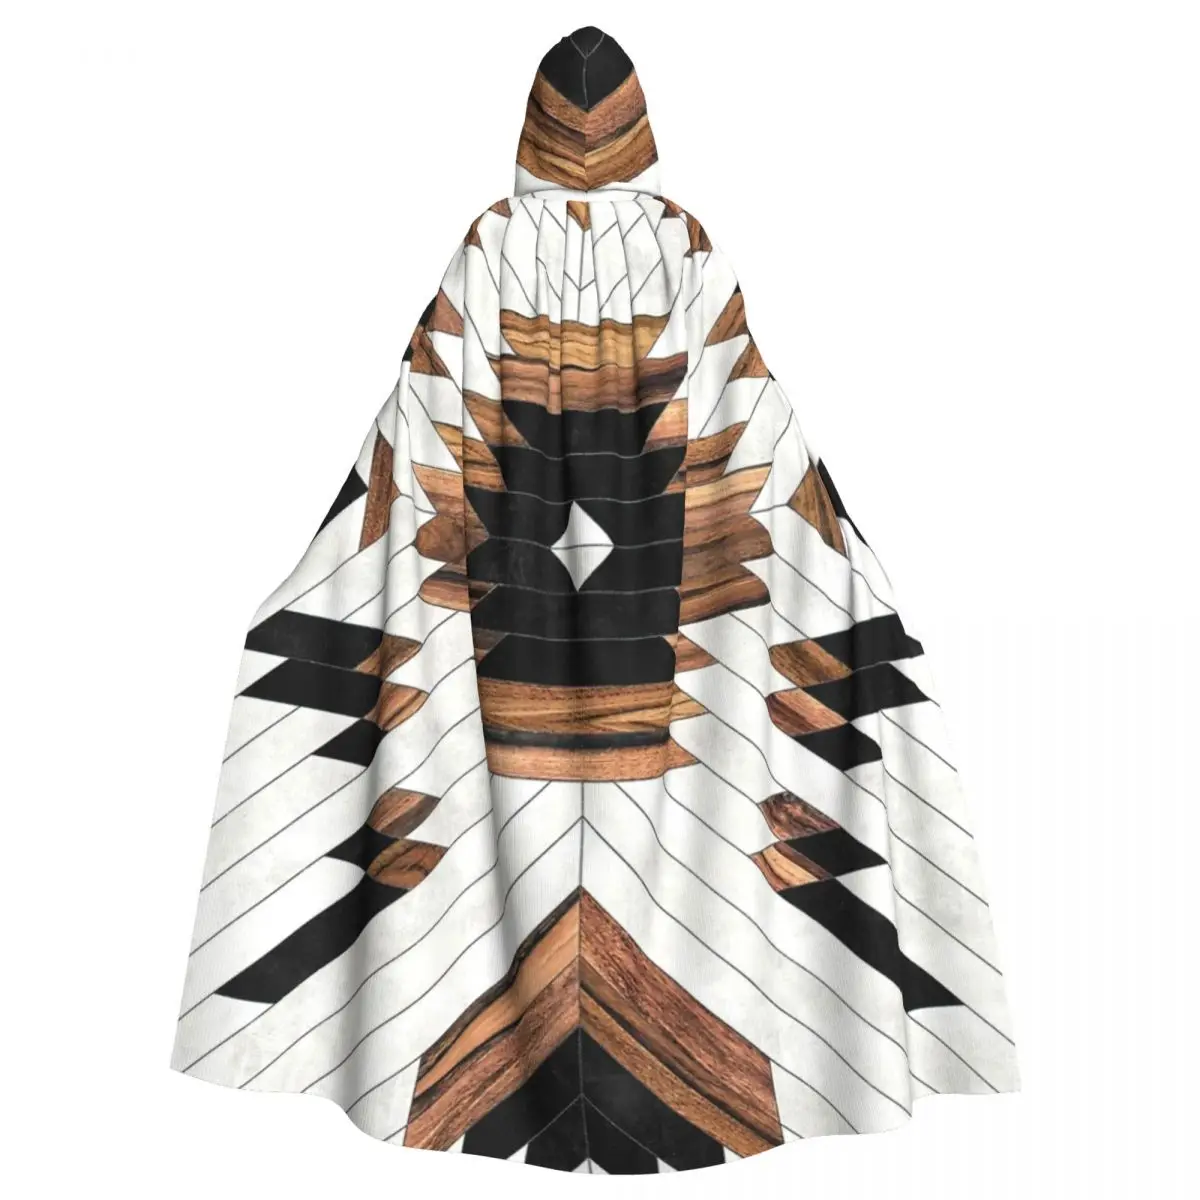 

Urban Tribal Pattern- Aztec Hooded Cloak Halloween Party Cosplay Woman Men Adult Long Witchcraft Robe Hood